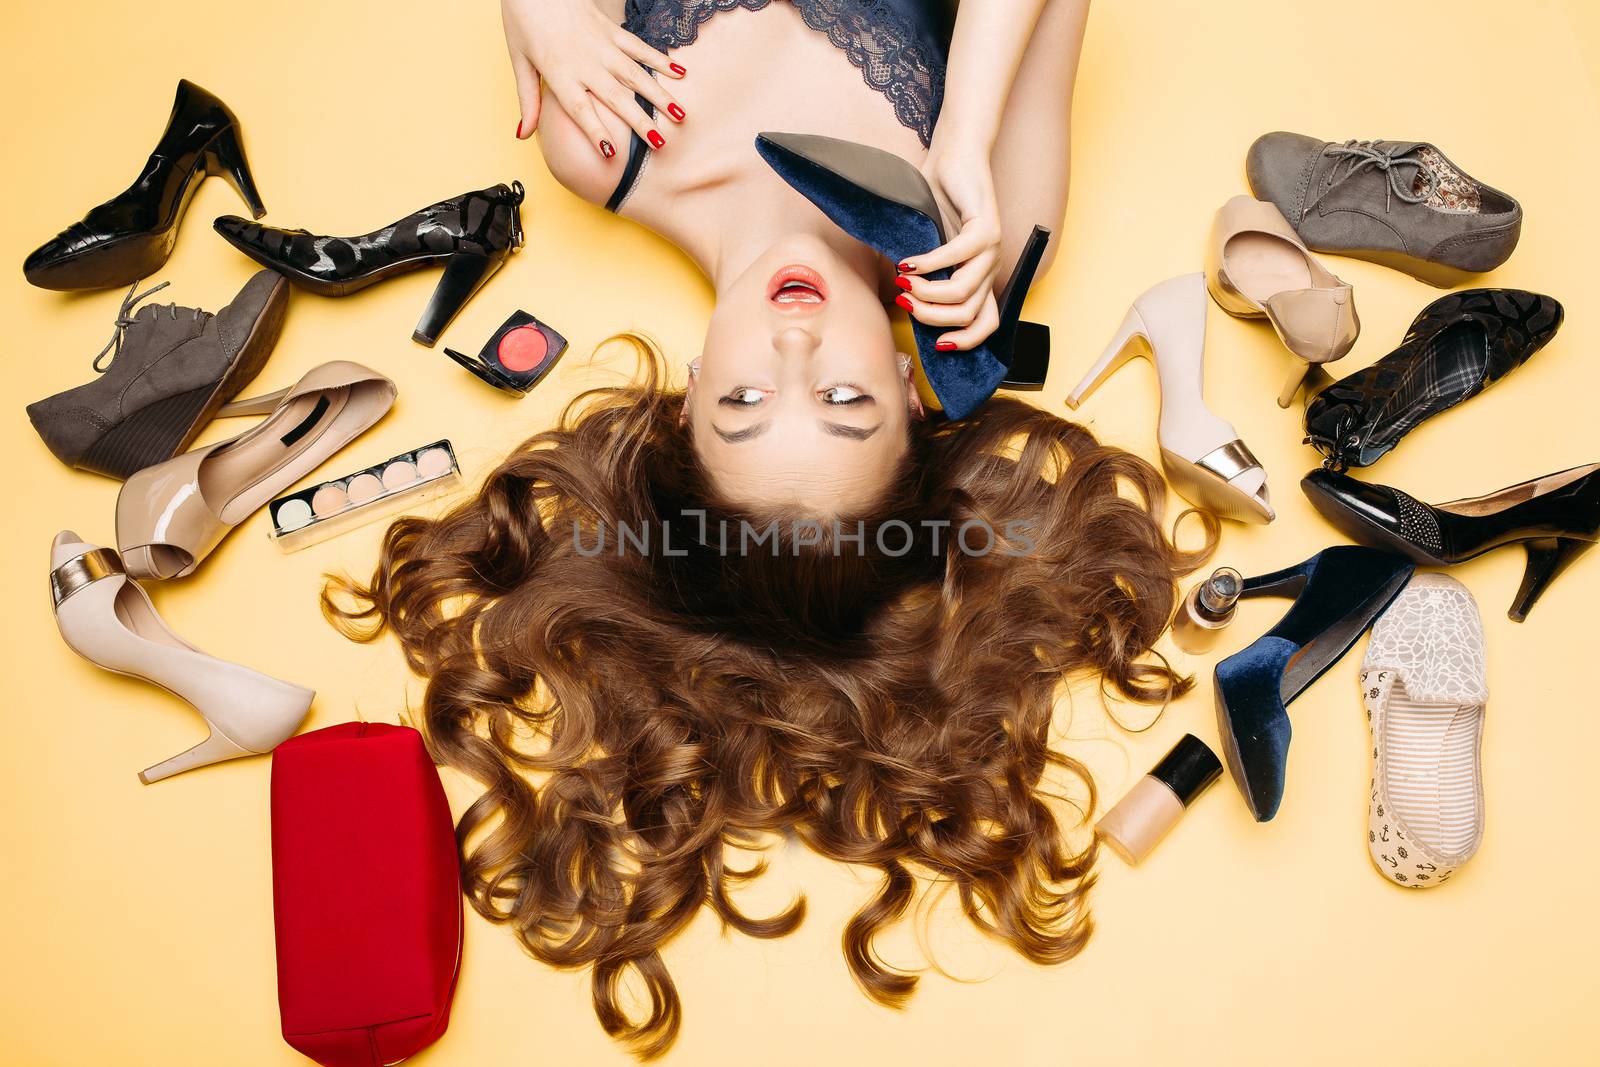 Fashionable brunette woman with long curly hair lying on yellow flor among many colorful shoes and laying, imitating conversation of like call phone. Beautiful girl emotionally posing, holding heel.